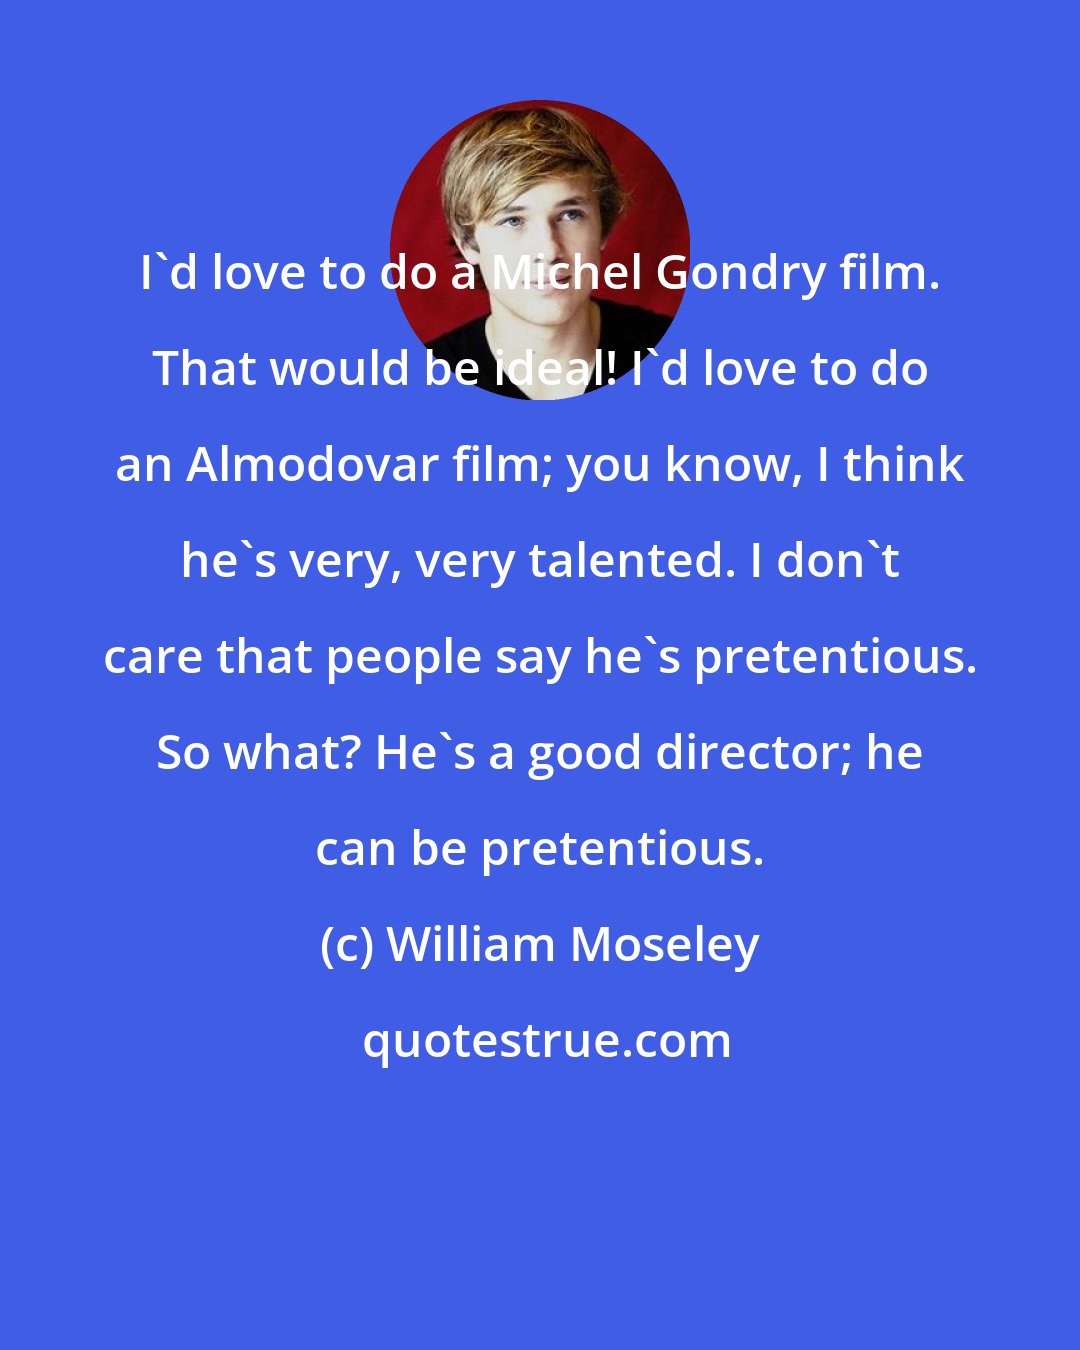 William Moseley: I'd love to do a Michel Gondry film. That would be ideal! I'd love to do an Almodovar film; you know, I think he's very, very talented. I don't care that people say he's pretentious. So what? He's a good director; he can be pretentious.